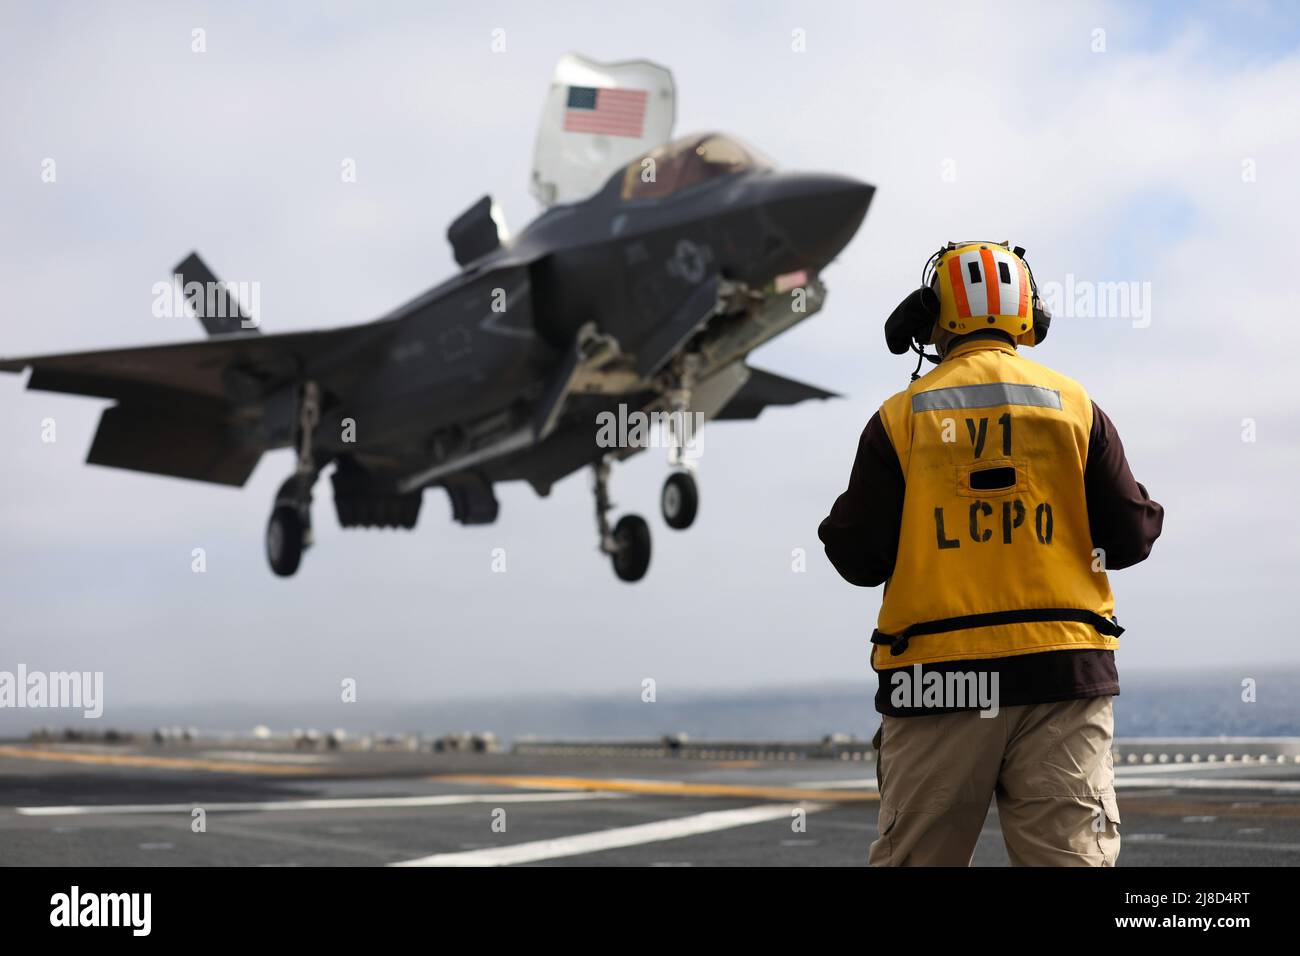 U.S. Navy Senior Chief Aviation Boatswains Mate Dennis Boyle, watches a Marine Corps F-35B Lightning II fighter aircraft, attached to the Knightriders of Marine Medium Tiltrotor Squadron 164, performs a vertical landing on the flight deck of the Wasp-class amphibious assault ship USS Makin Island, October 19, 2020 operating on the Pacific Ocean. Stock Photo